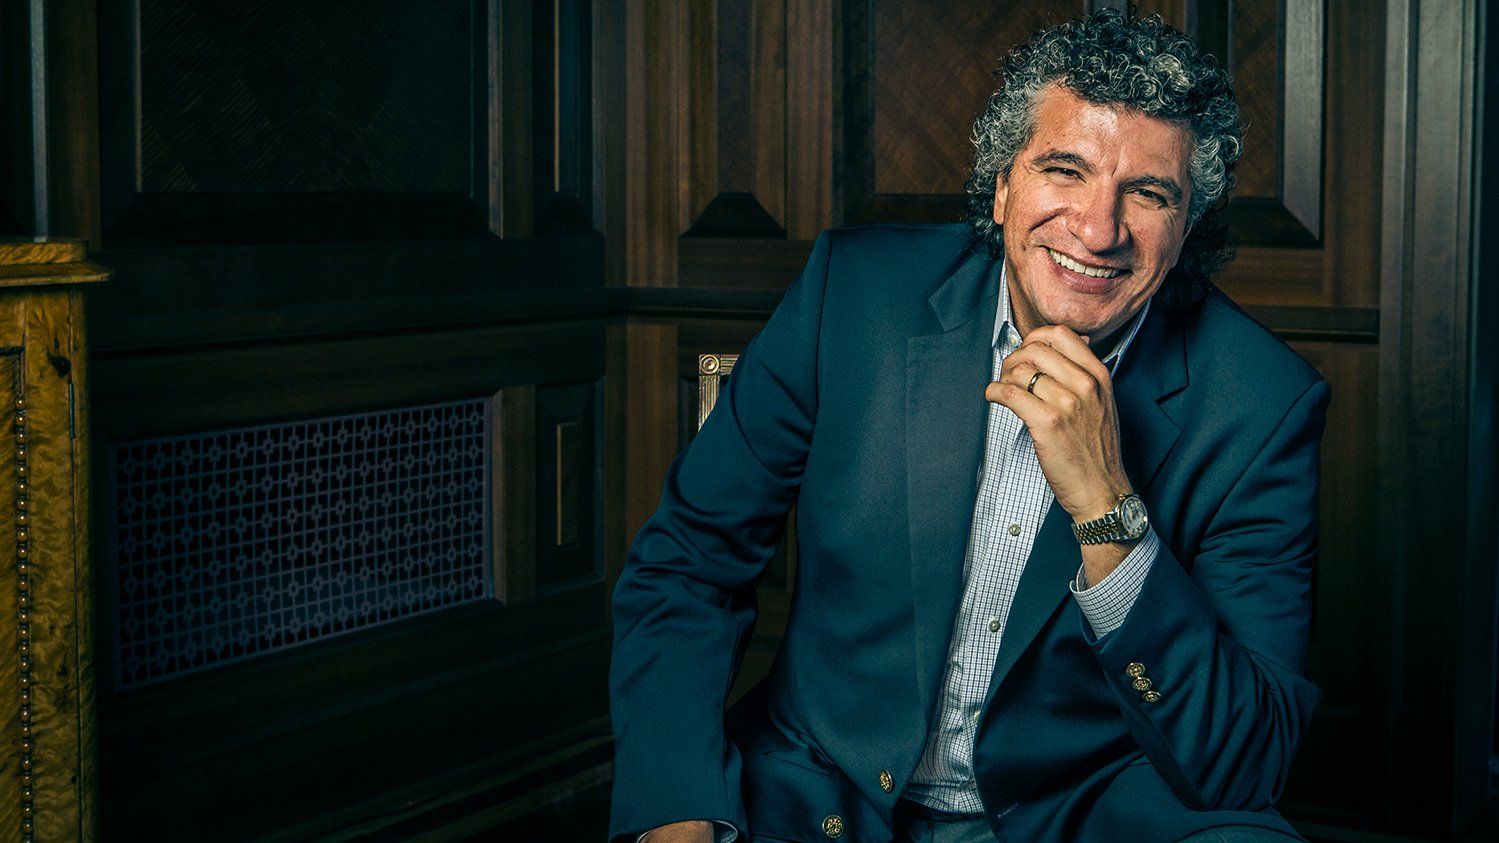 Featured image for “Grammy Winner Giancarlo Guerrero Grew up in Costa Rica Listening To WFMT. Now He’s Making His CSO Conducting Debut.”